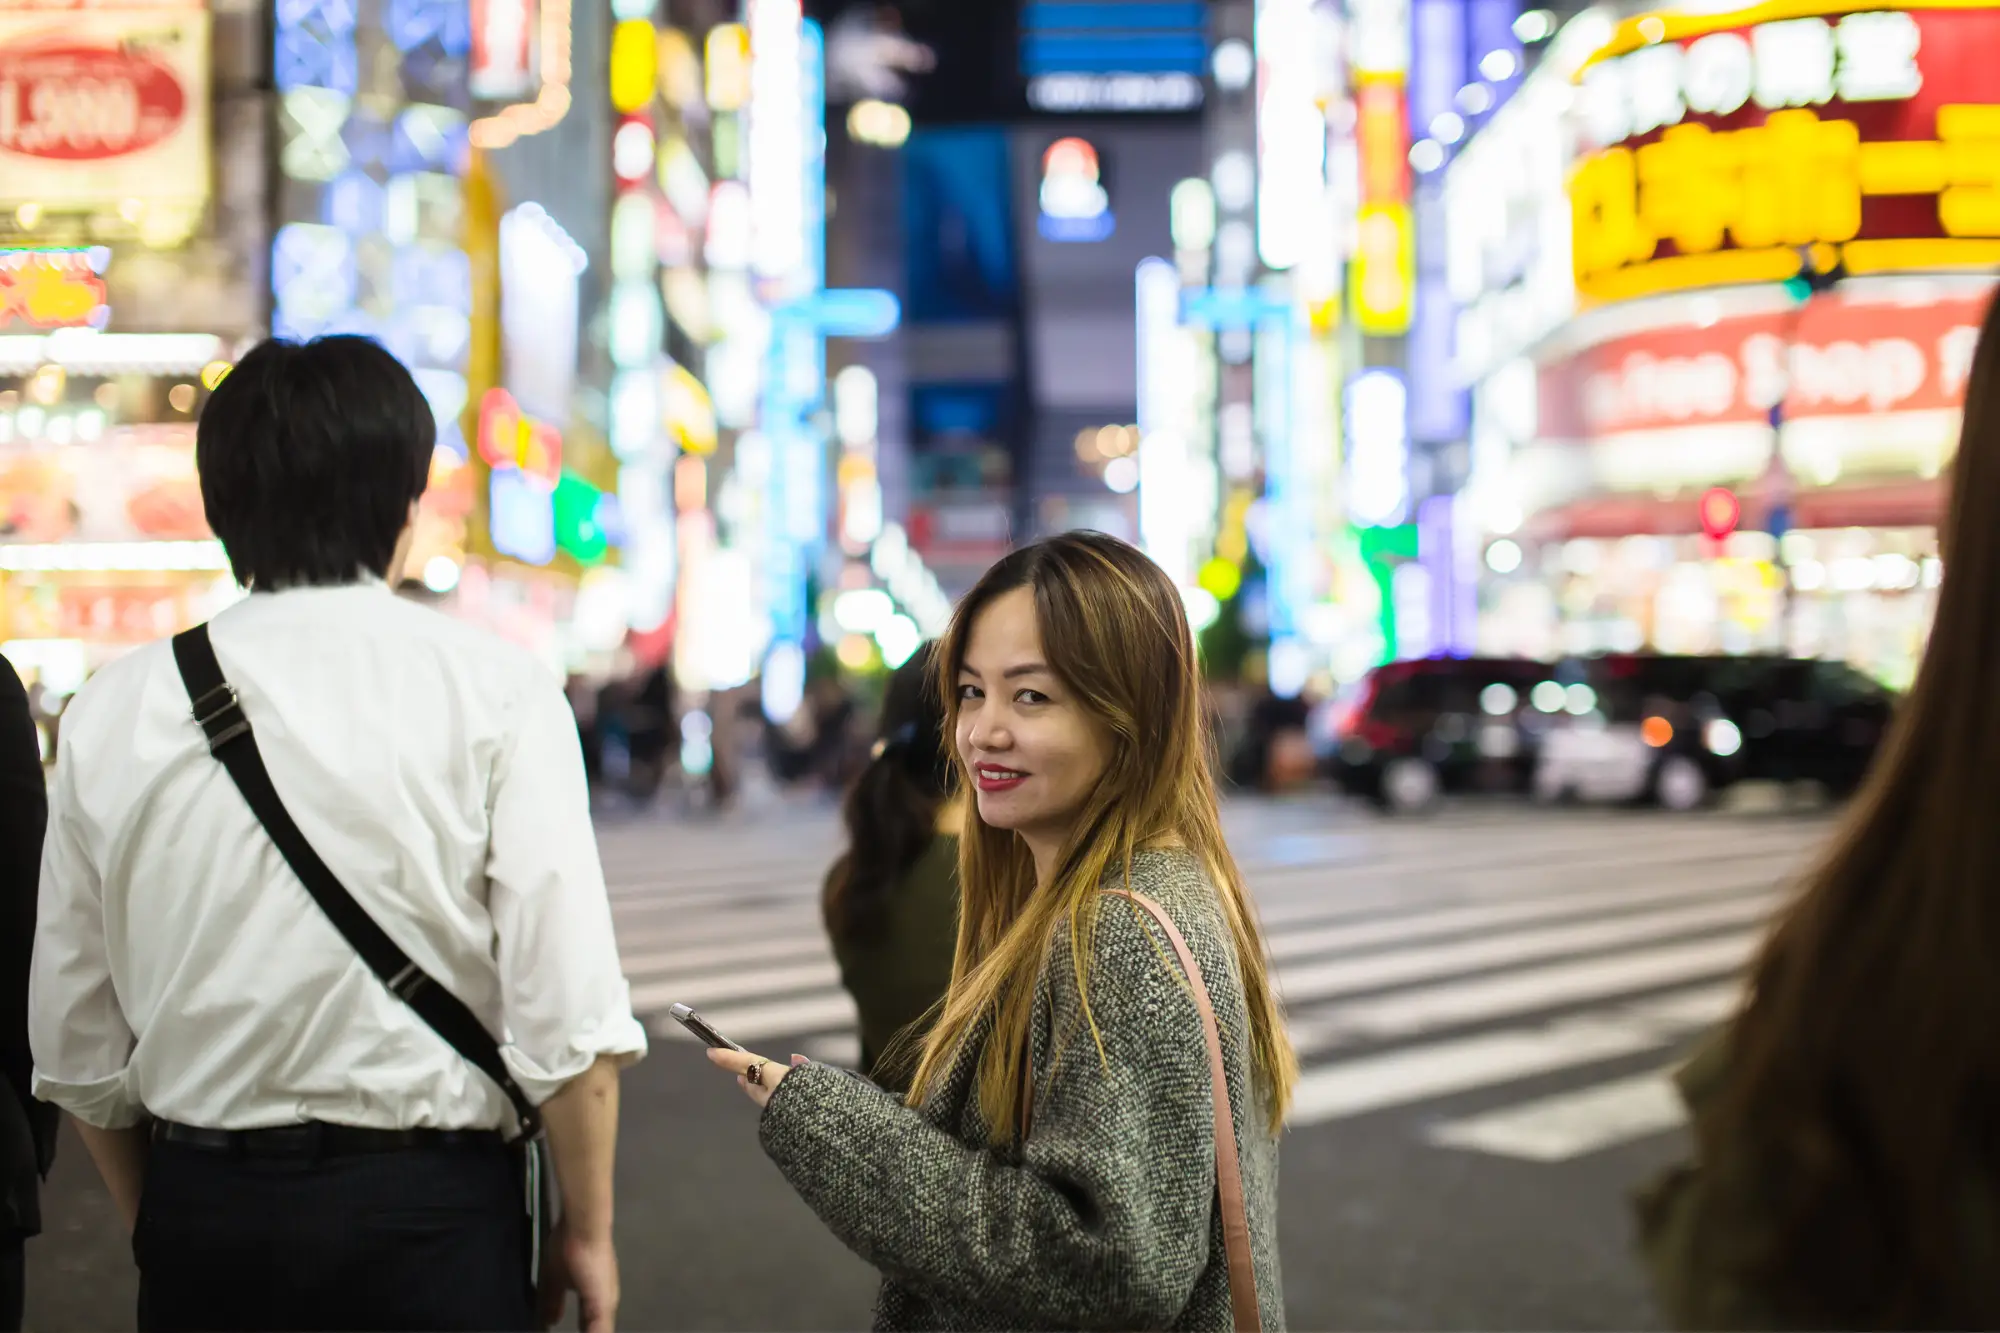 the 8 best places to take pictures in tokyo